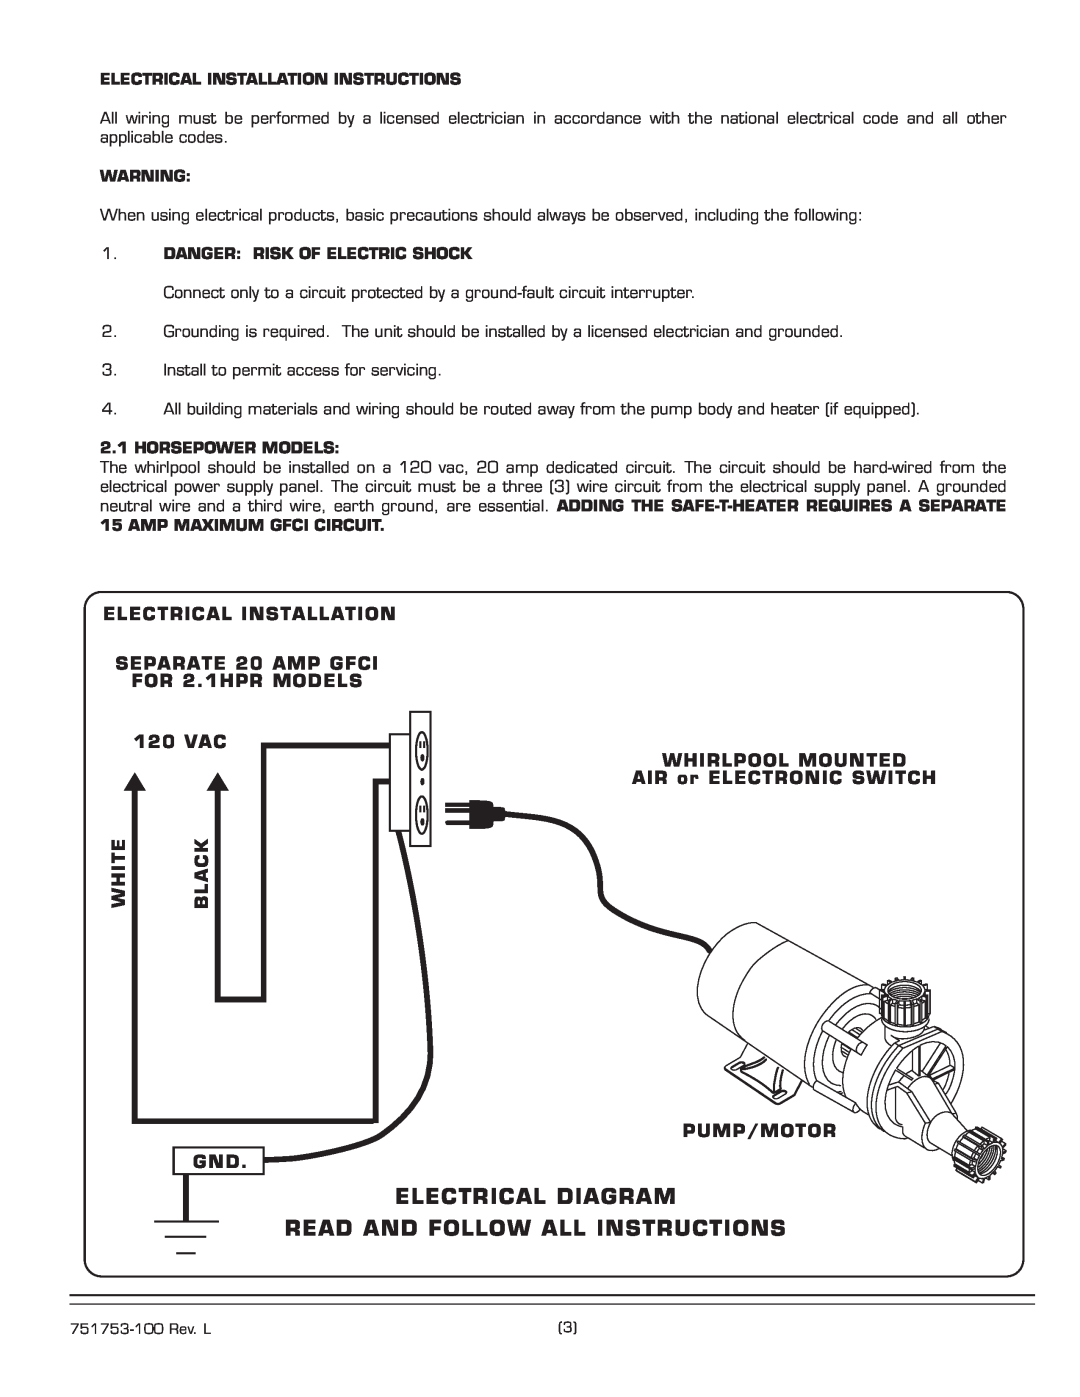 American Standard 2709 Electrical Diagram, Read And Follow All Instructions, Electrical Installation Instructions 